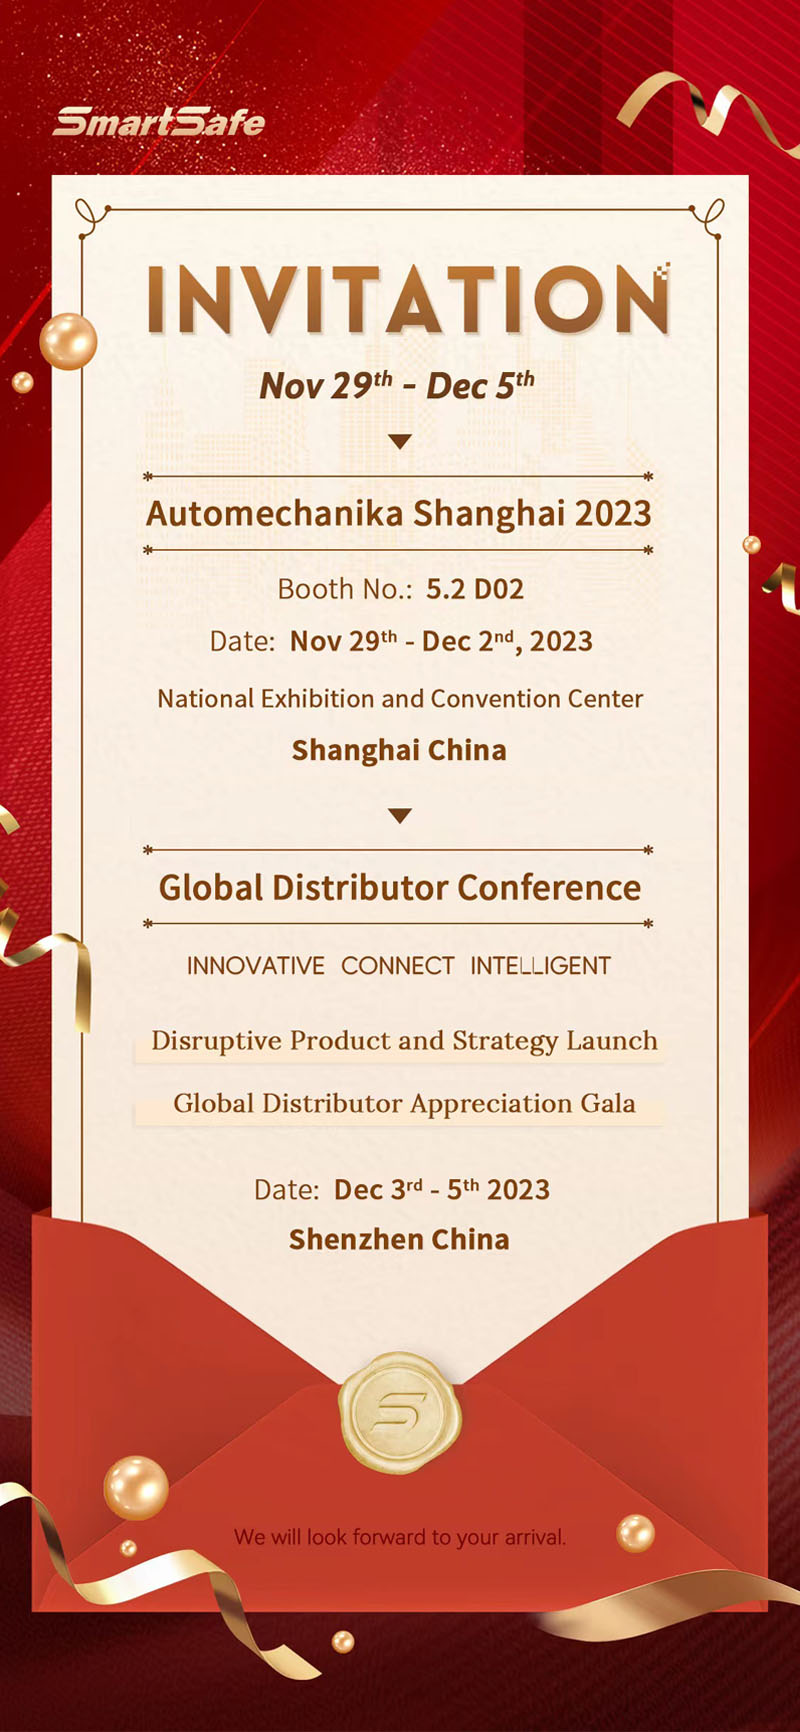 A Warm Invitation to SmartSafe’s First Global Distributor Conference & Shanghai Auto Parts Exhibition